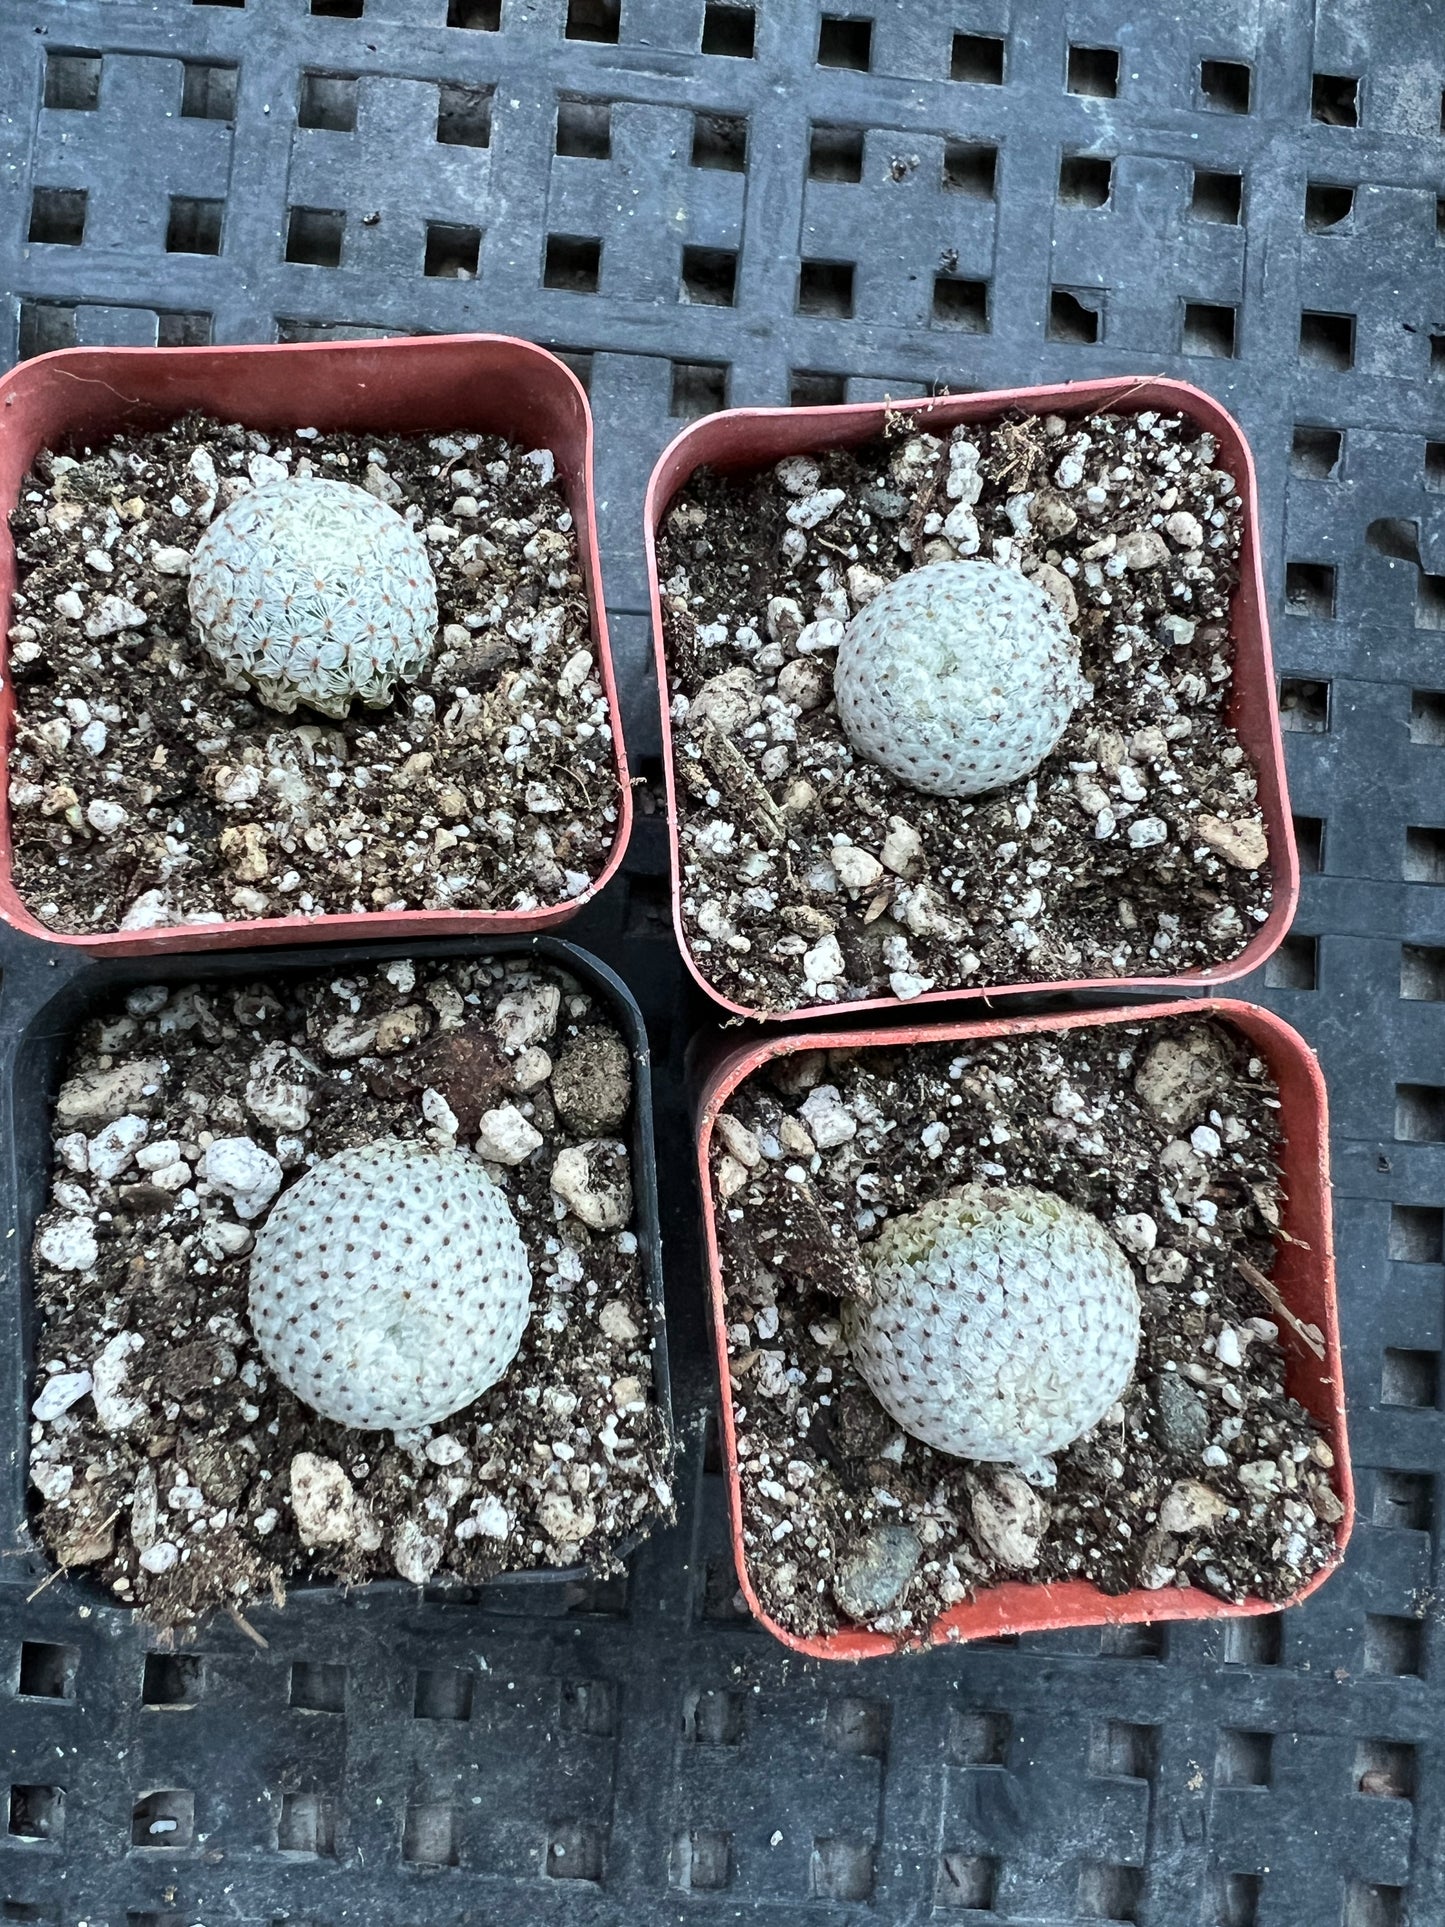 Mammillaria breviplumosa cactus, newly discovered species, pair of large and smaller one.